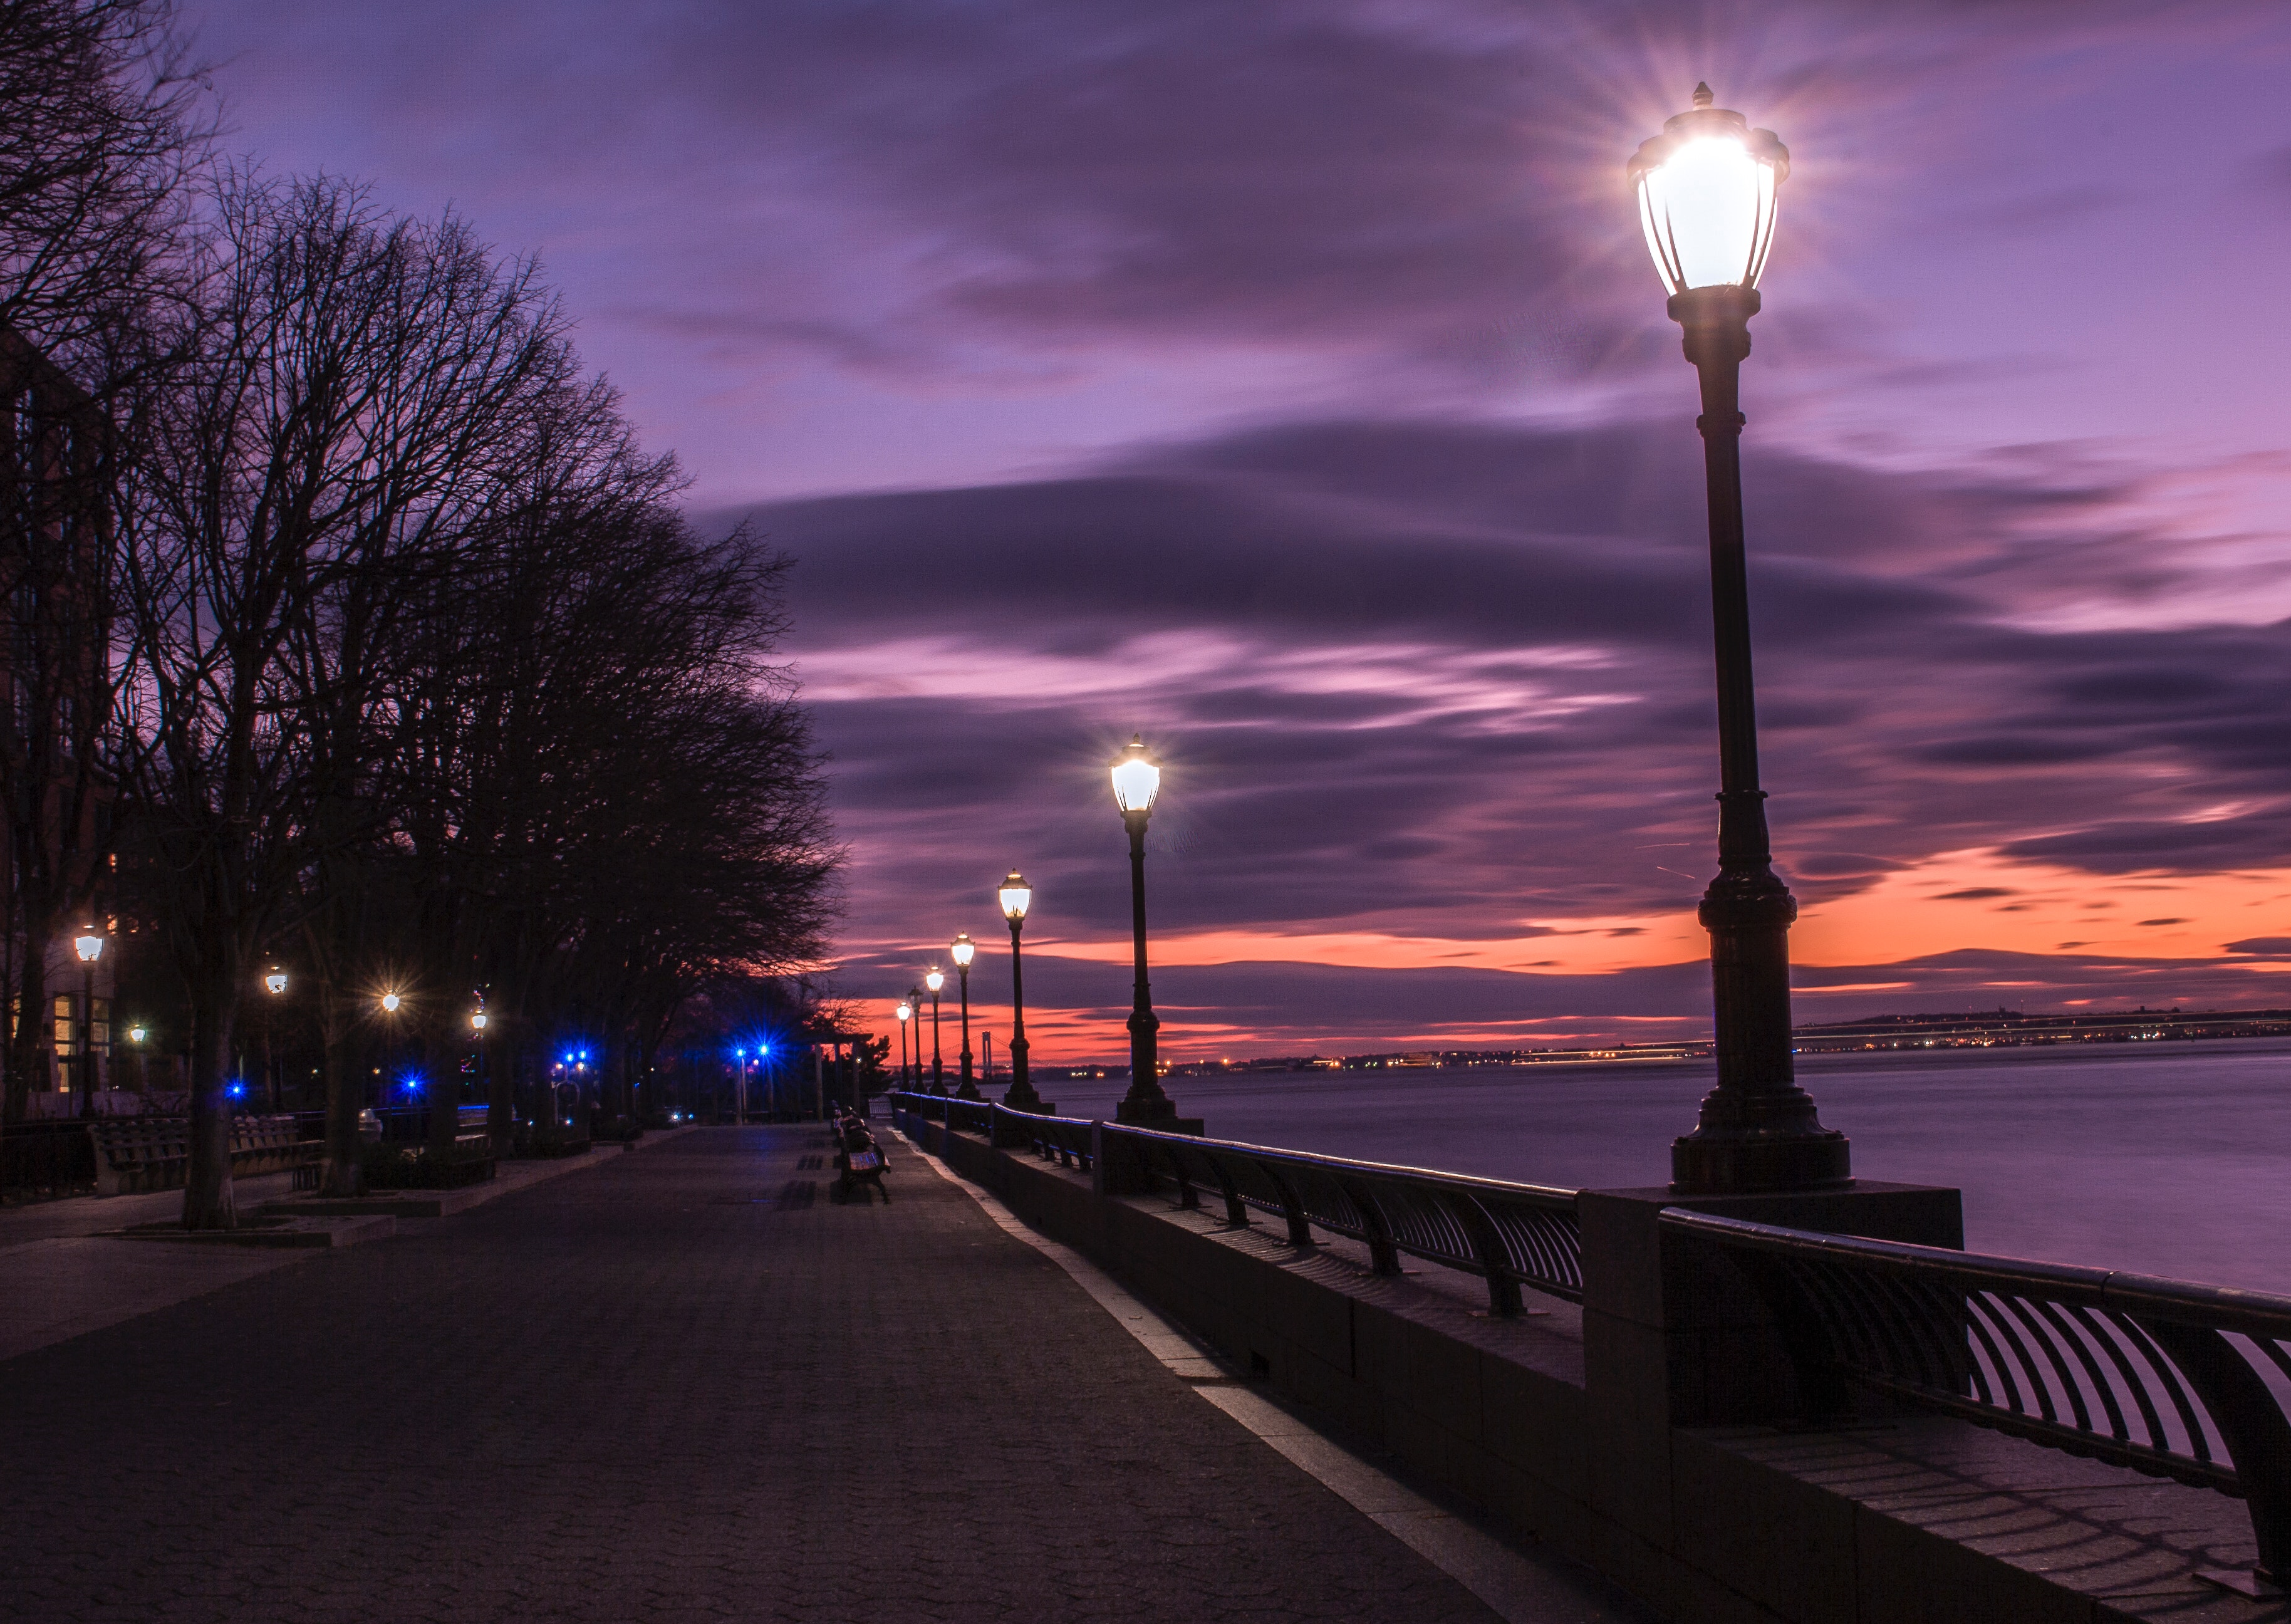 Photography of Turned on Street Lamps Beside Bay during Night Time, Architecture, Urban, Trees, Travel, HQ Photo